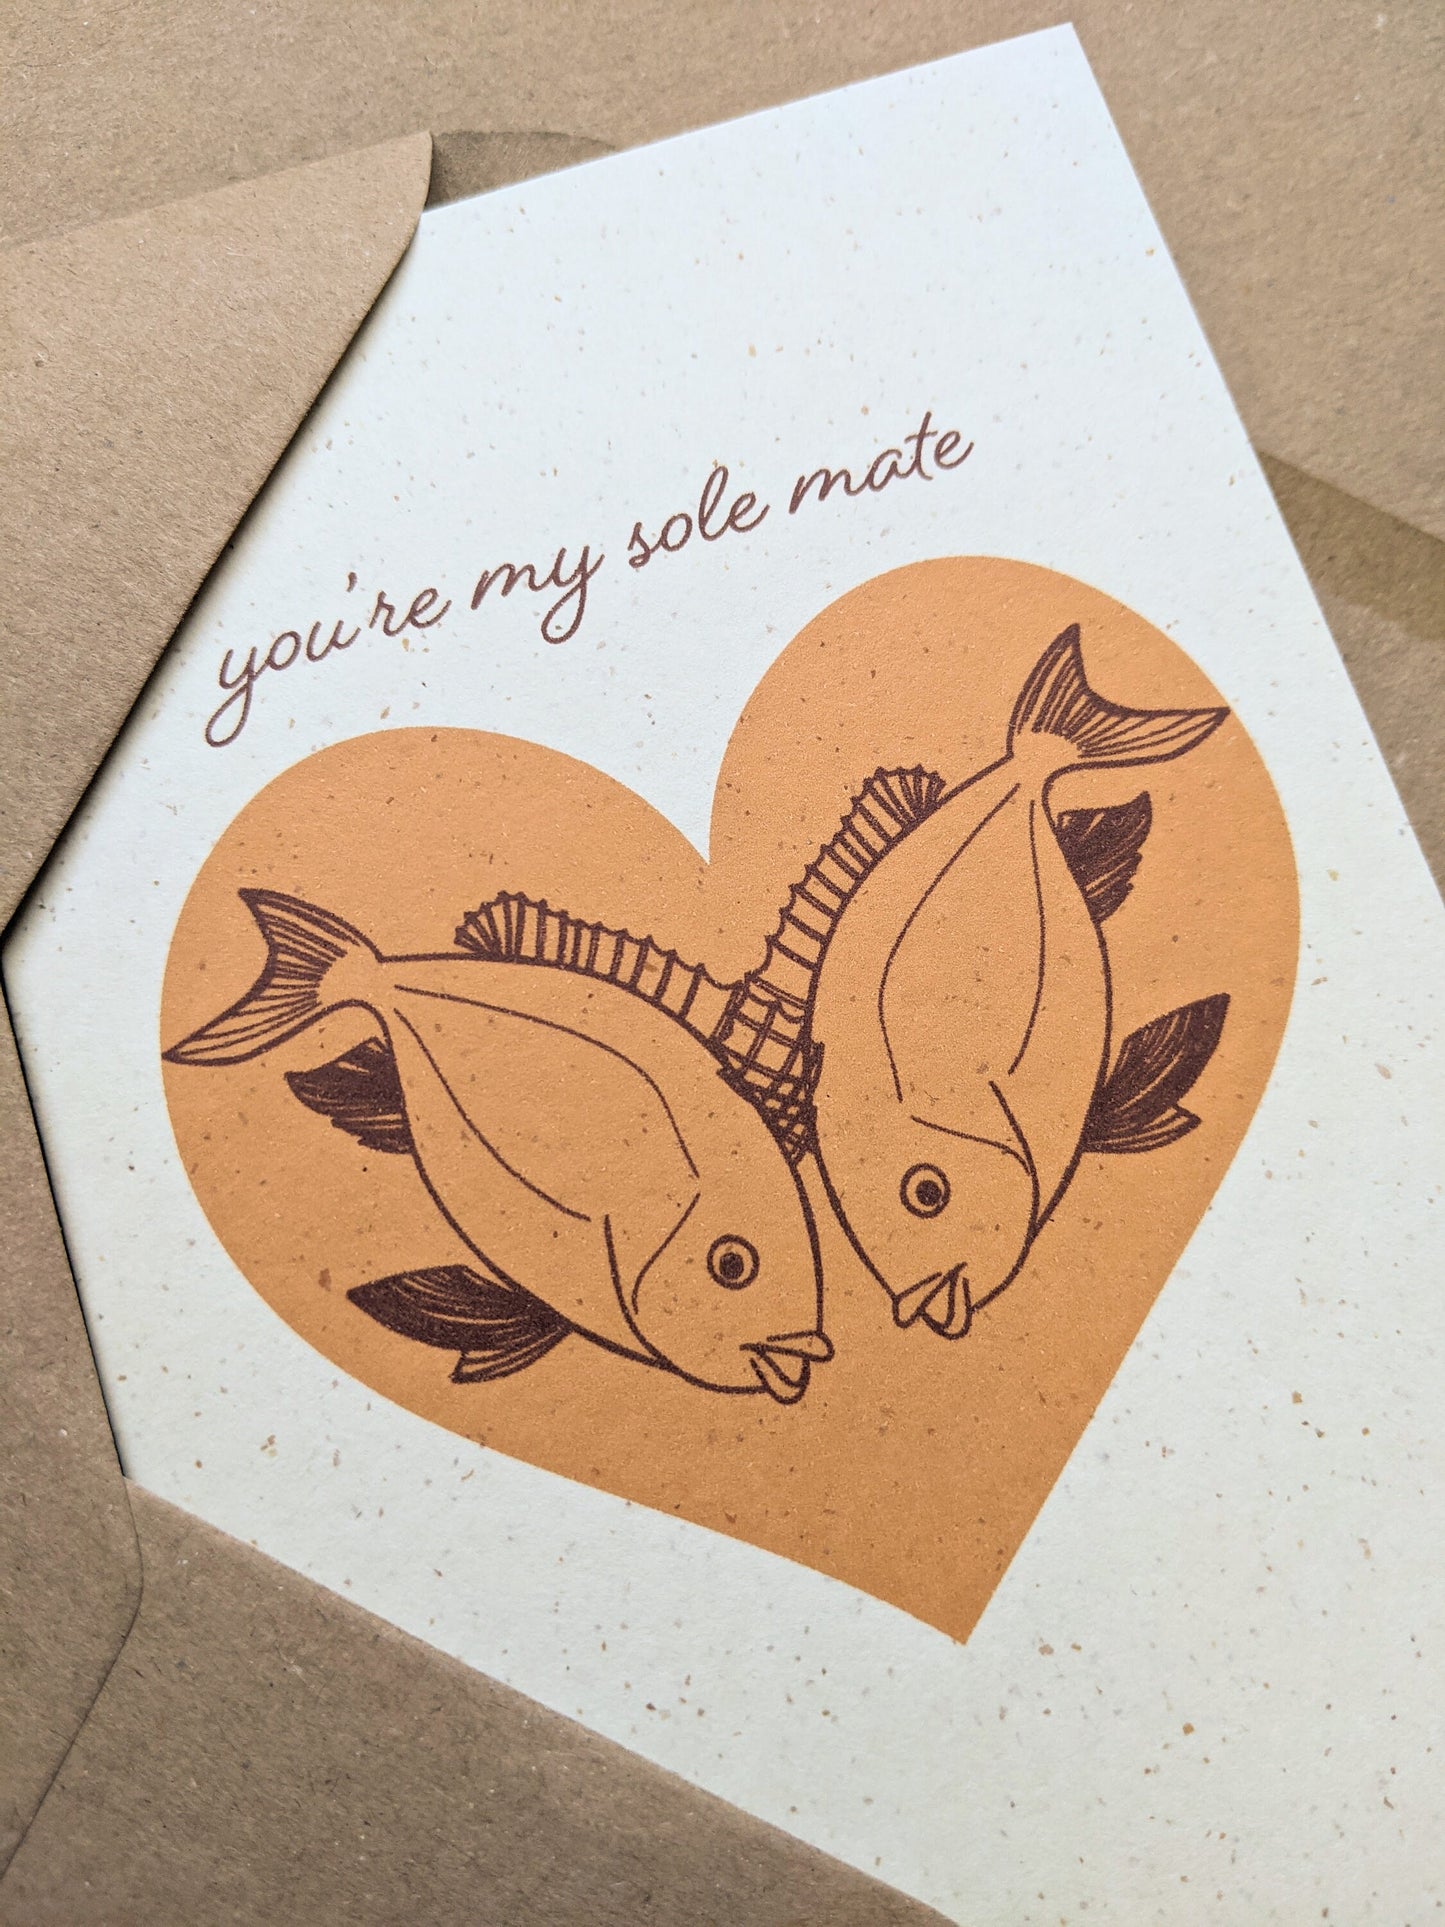 You're My Sole Mate Card